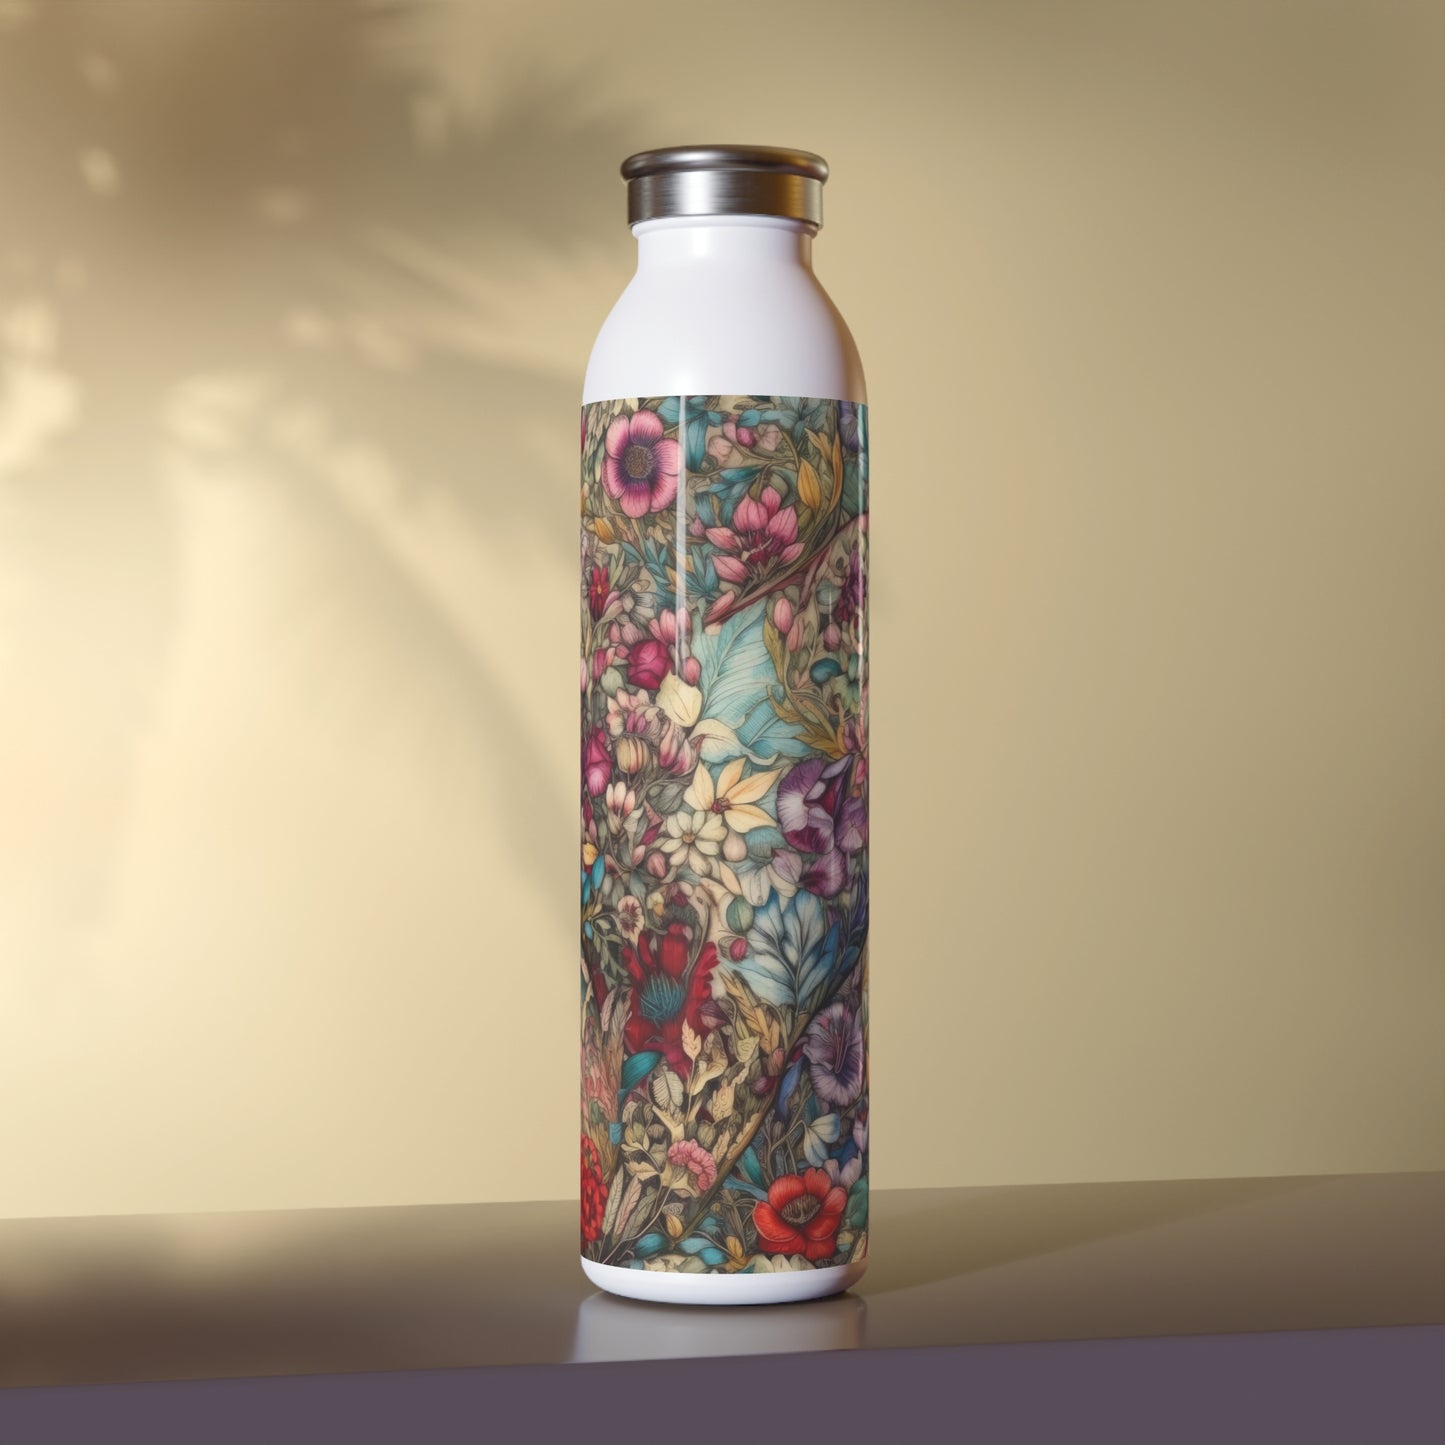 Fabric Hearts with Flowers 1.12 - Slim Water Bottle - Stainless Steel - 20oz